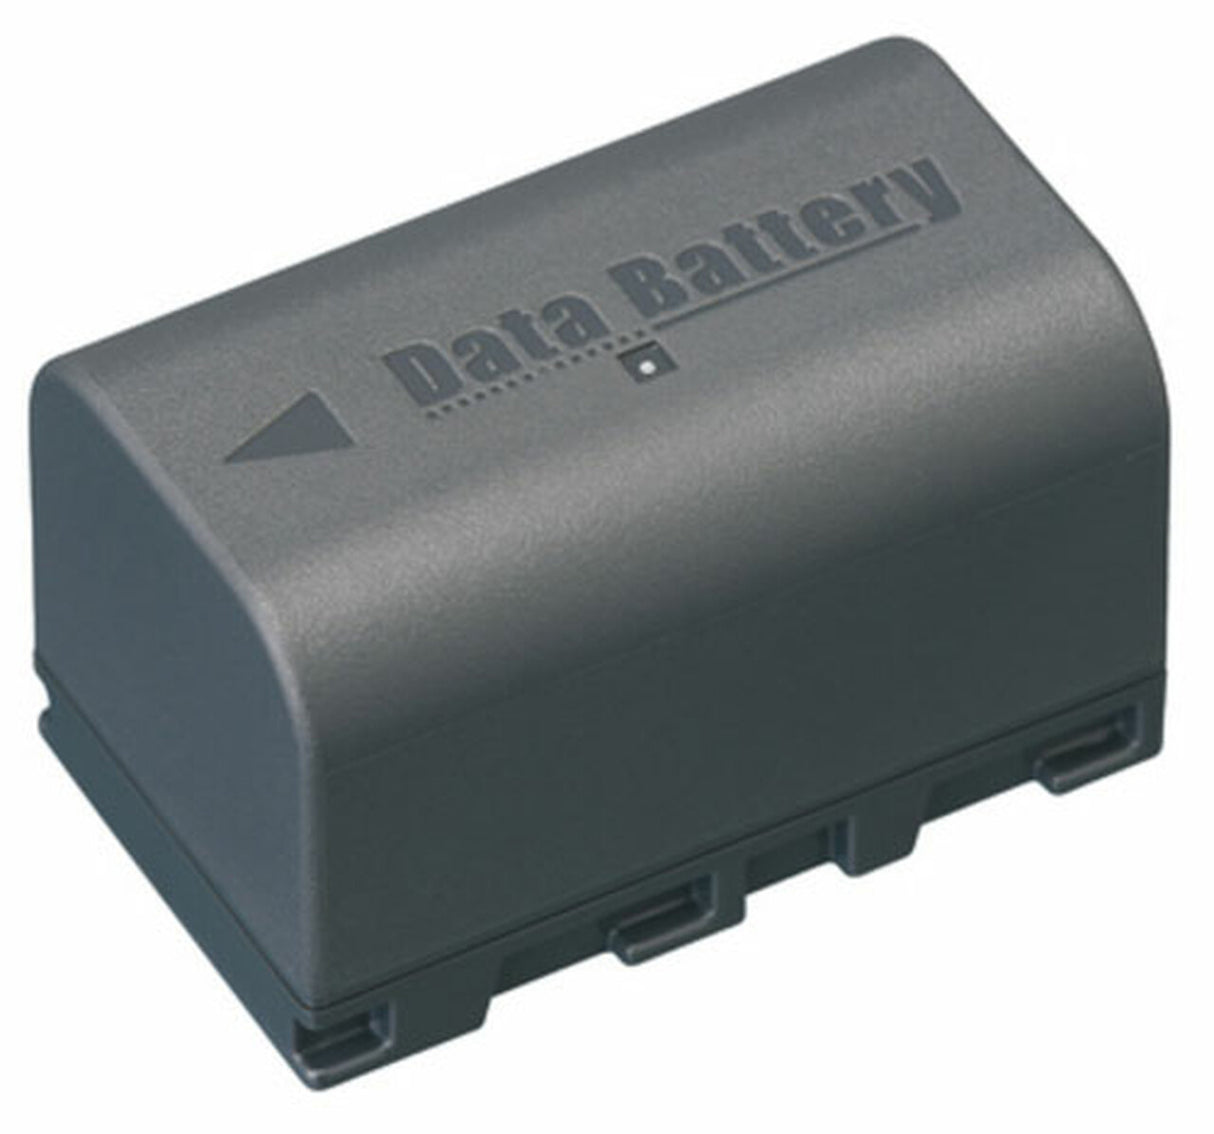 Battery For JVC GZ-MG465 Handycam Camcorders